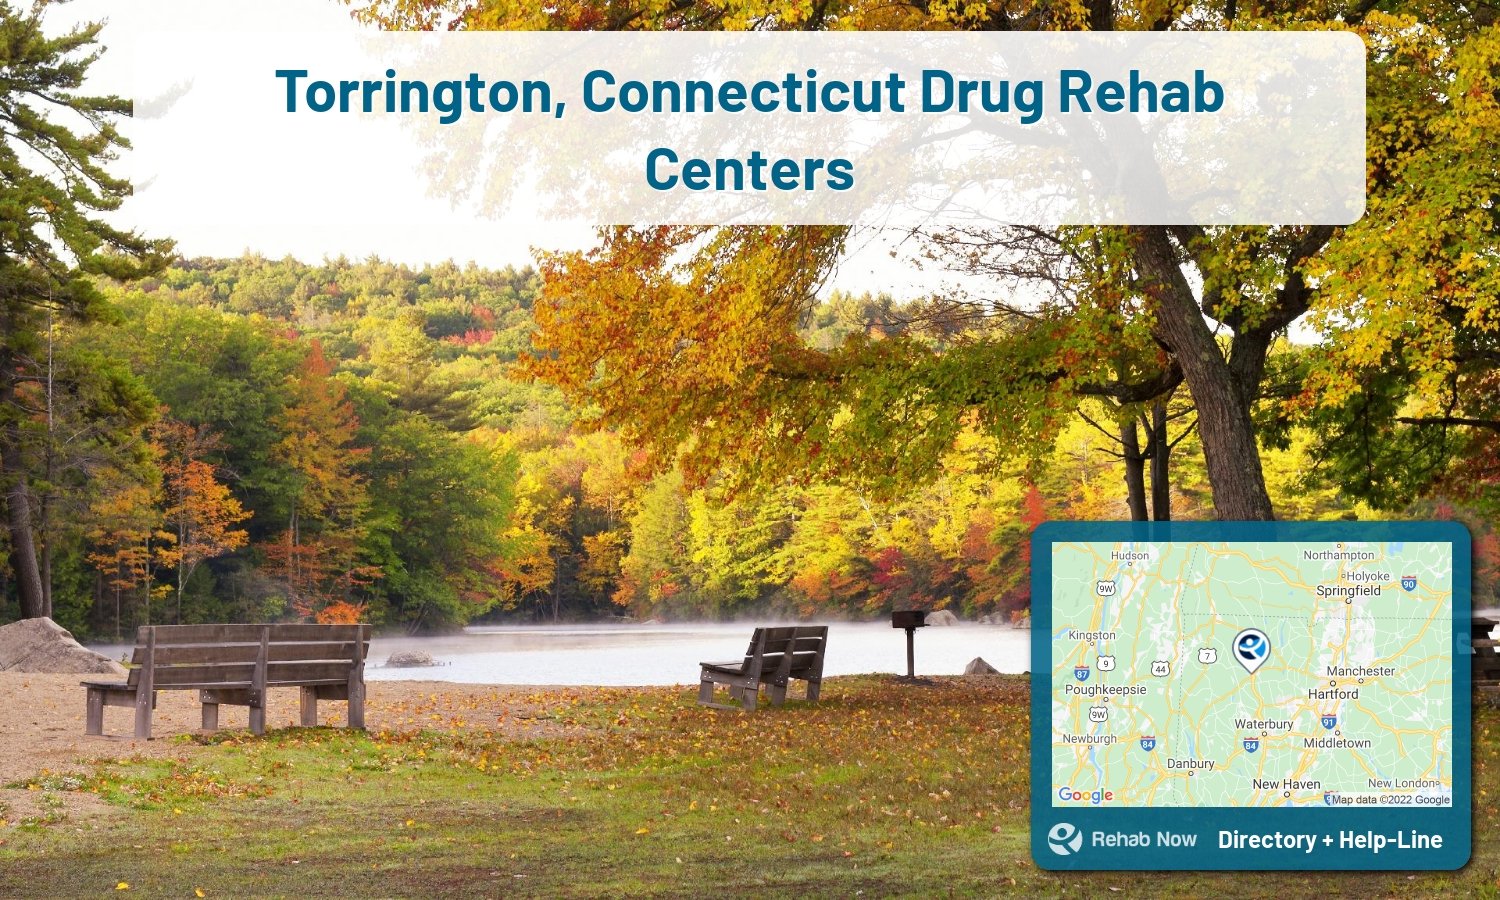 View options, availability, treatment methods, and more, for drug rehab and alcohol treatment in Torrington, Connecticut